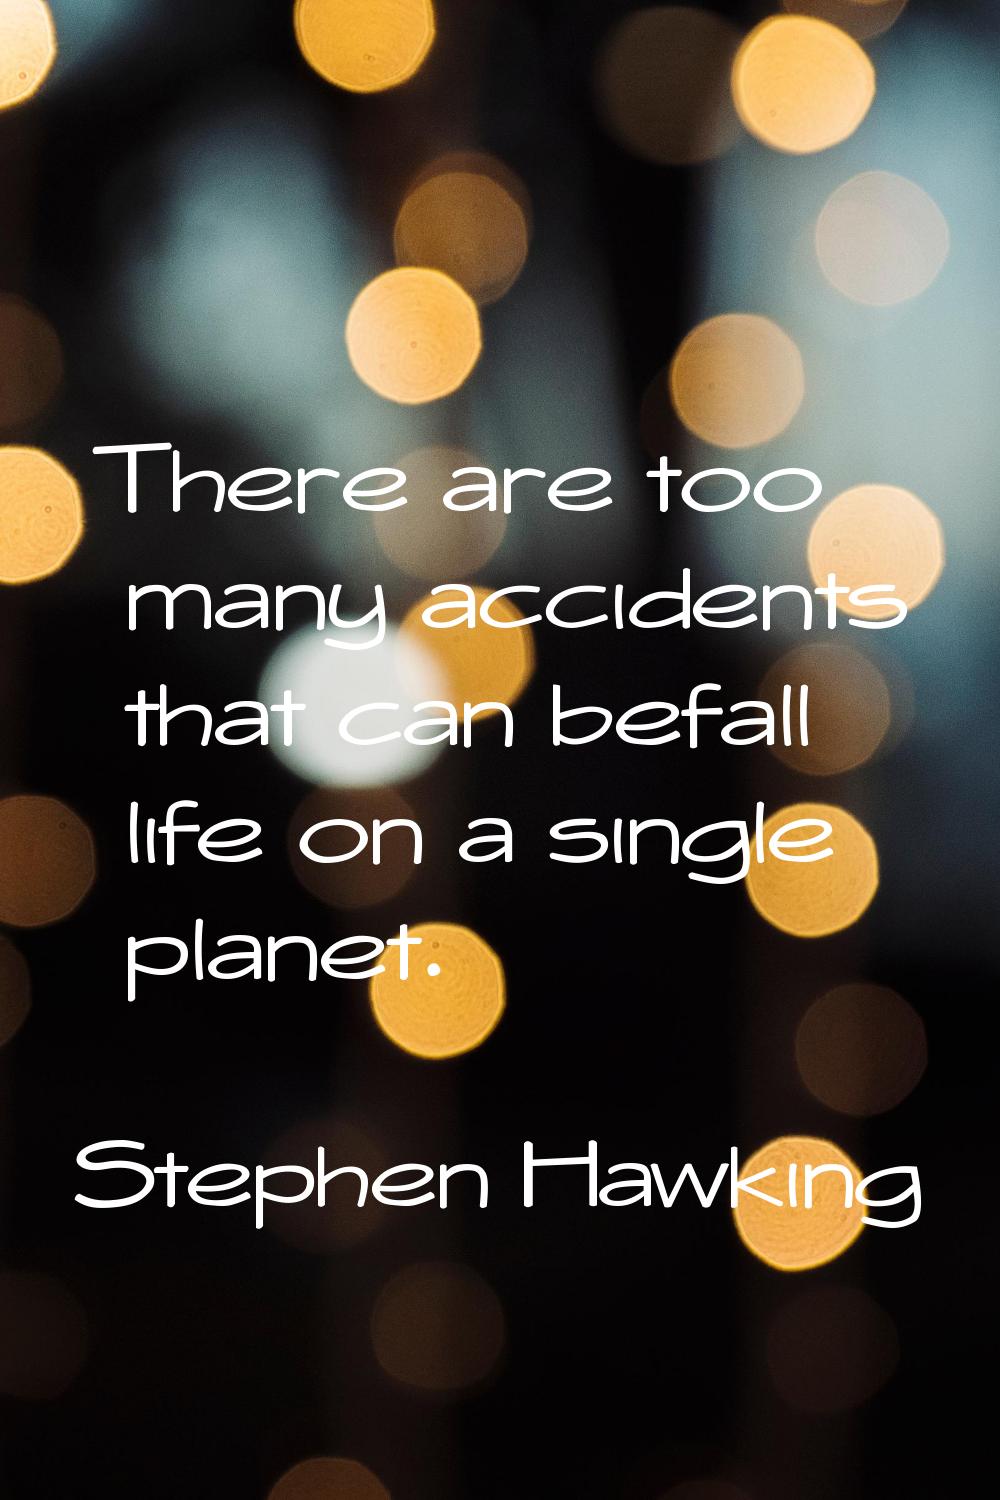 There are too many accidents that can befall life on a single planet.